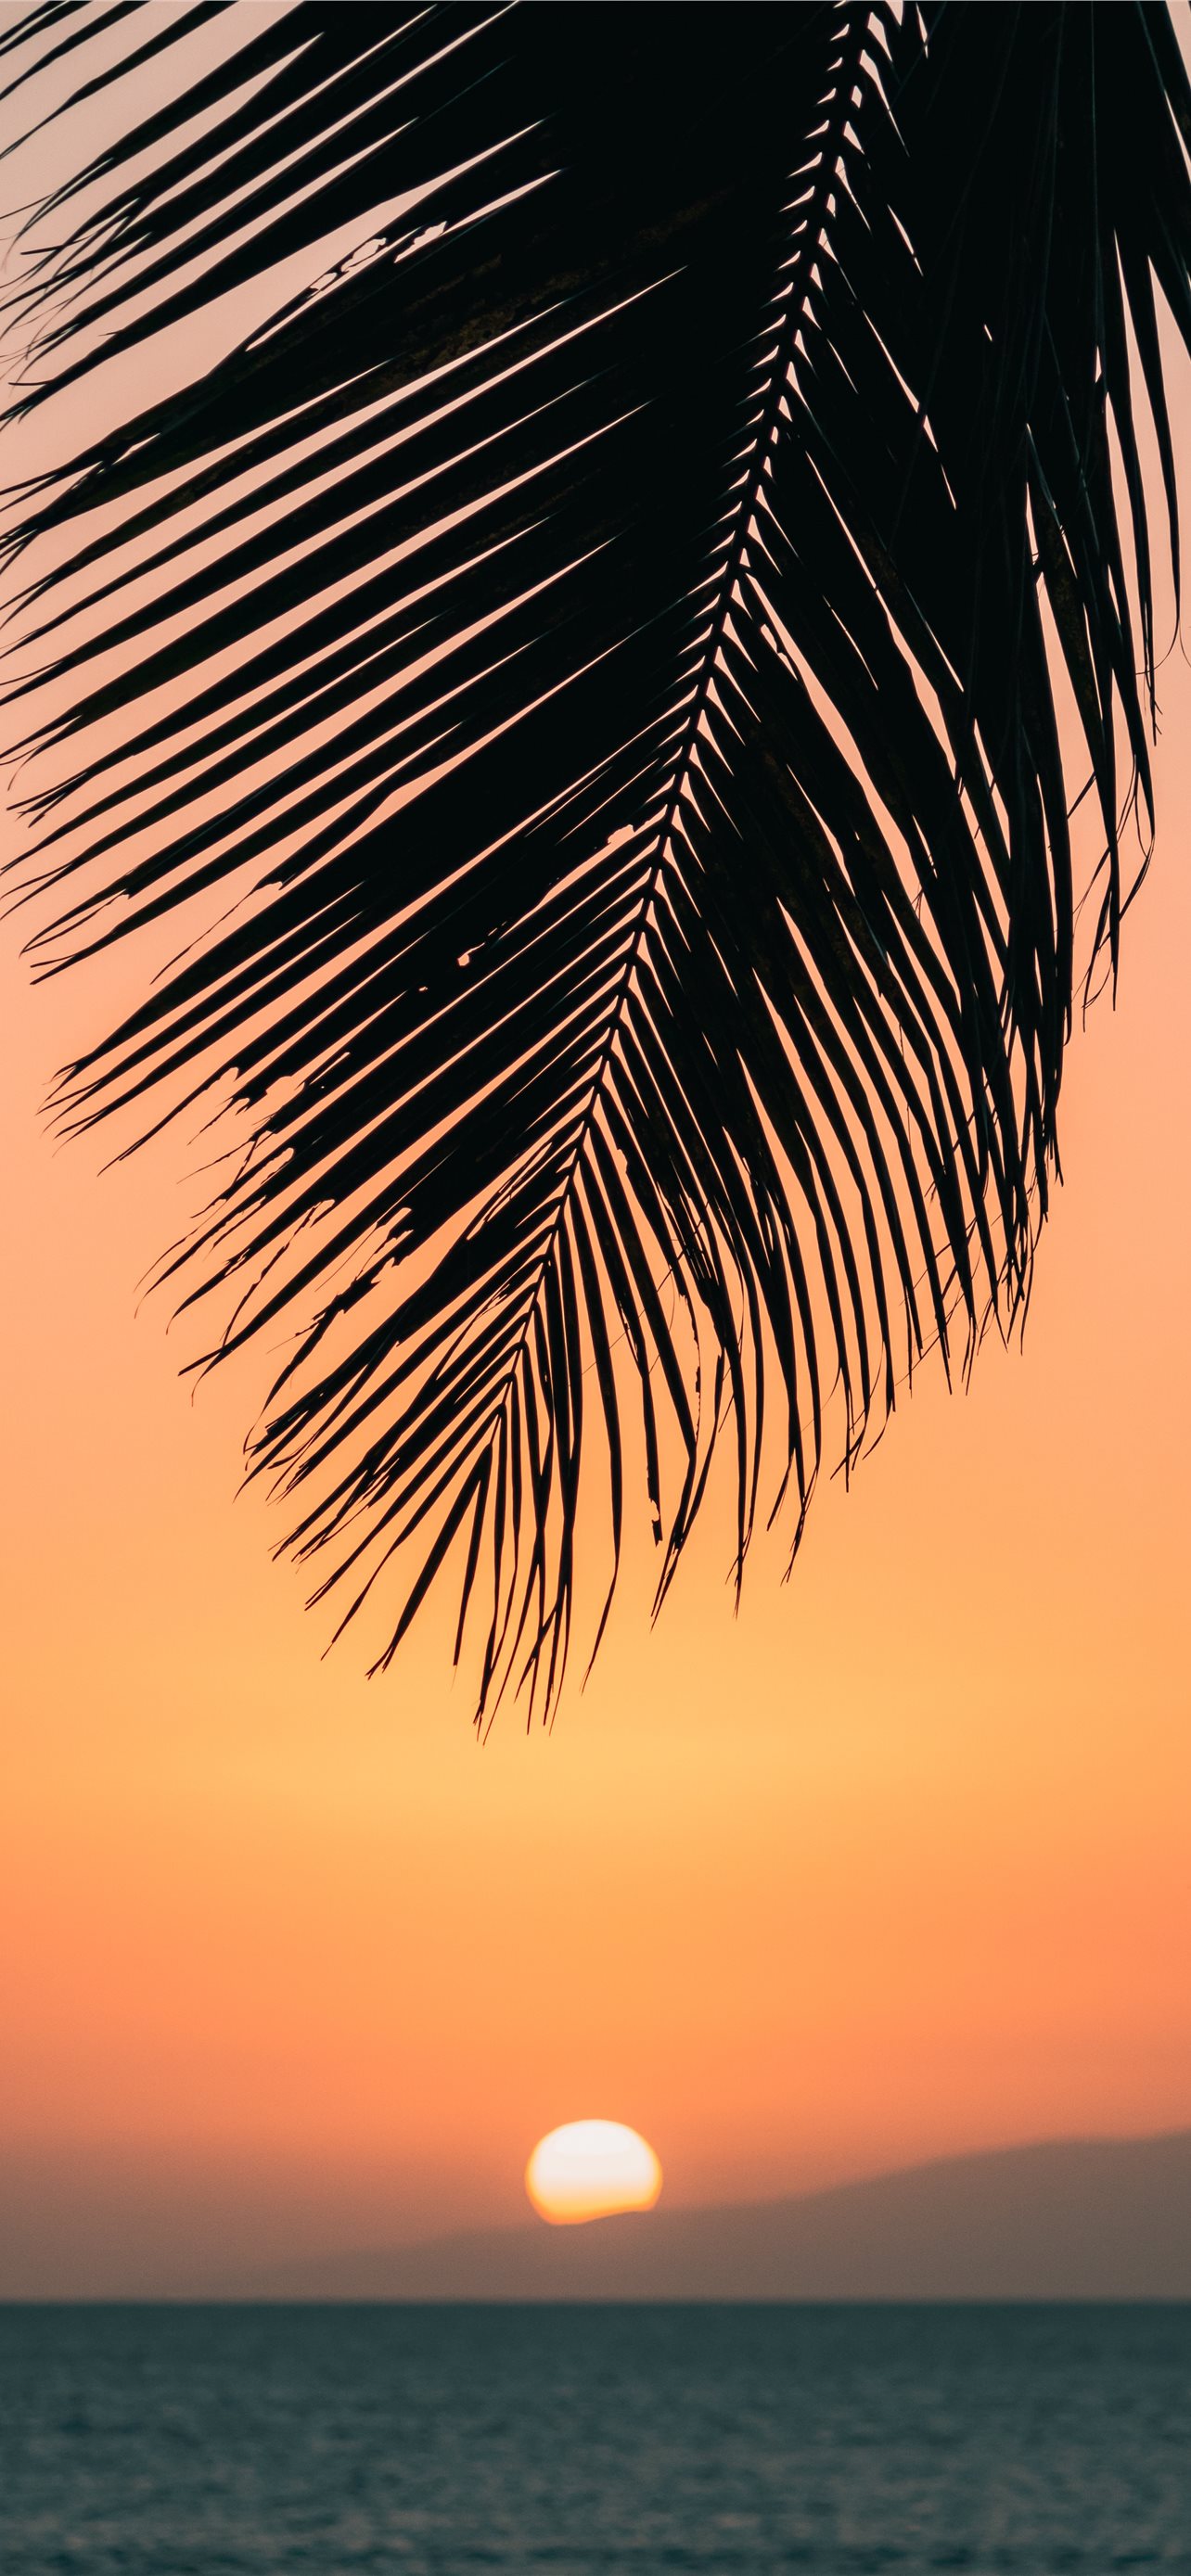 Calm Ocean At Sunset Iphone Wallpapers Free Download